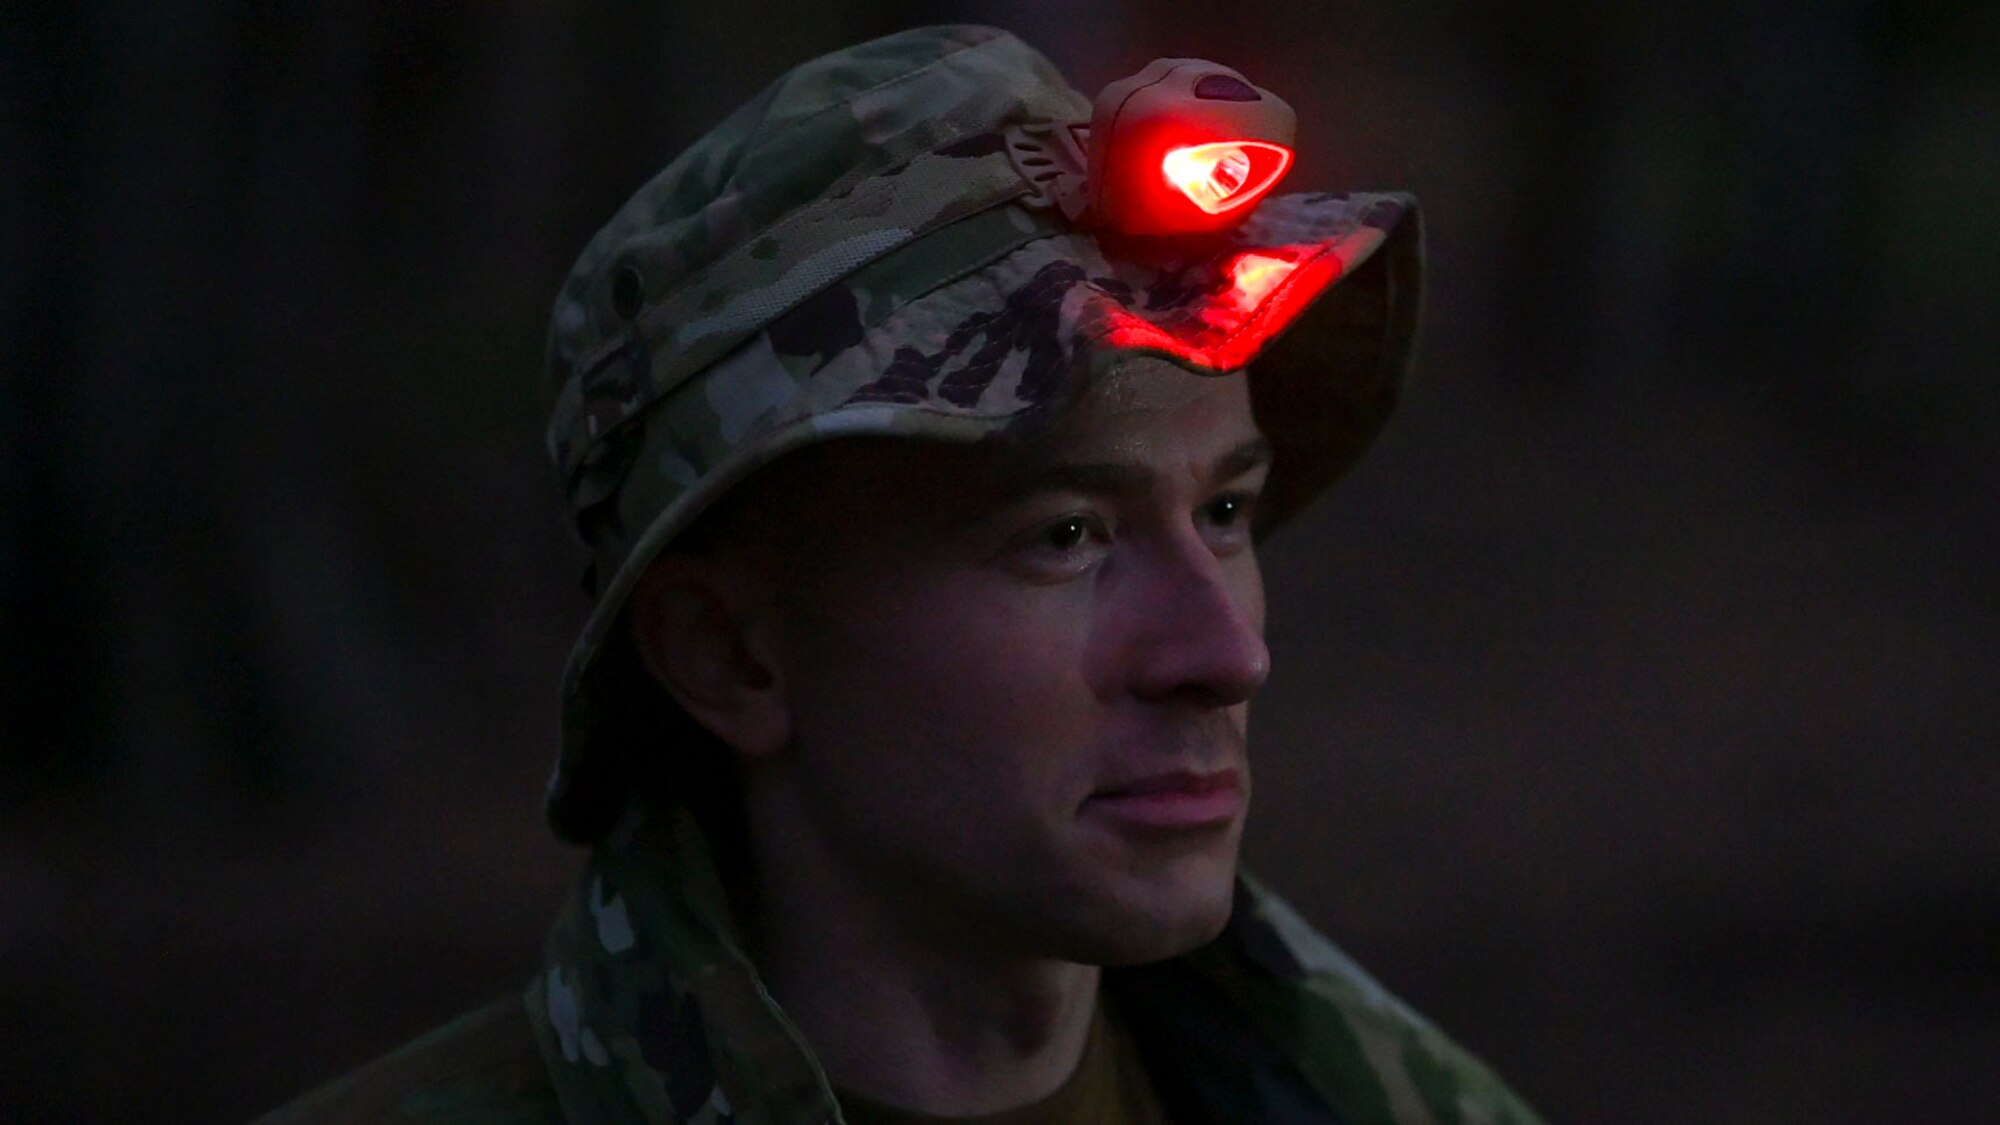 U.S. Air Force 1st Lt. Aaron King, 36th Rescue Squadron pilot, turns on his head lamp at Bellows Air Force Station, Hawaii, Jan. 30, 2023. Members from Team Fairchild’s innovation cell conducted an event to review current foundational survival training methods and their applicability to tropic, jungle, and coastal conditions by taking three groups of members with varying levels of survival training. (U.S. Air Force photo by Airman 1st Class Haiden Morris)